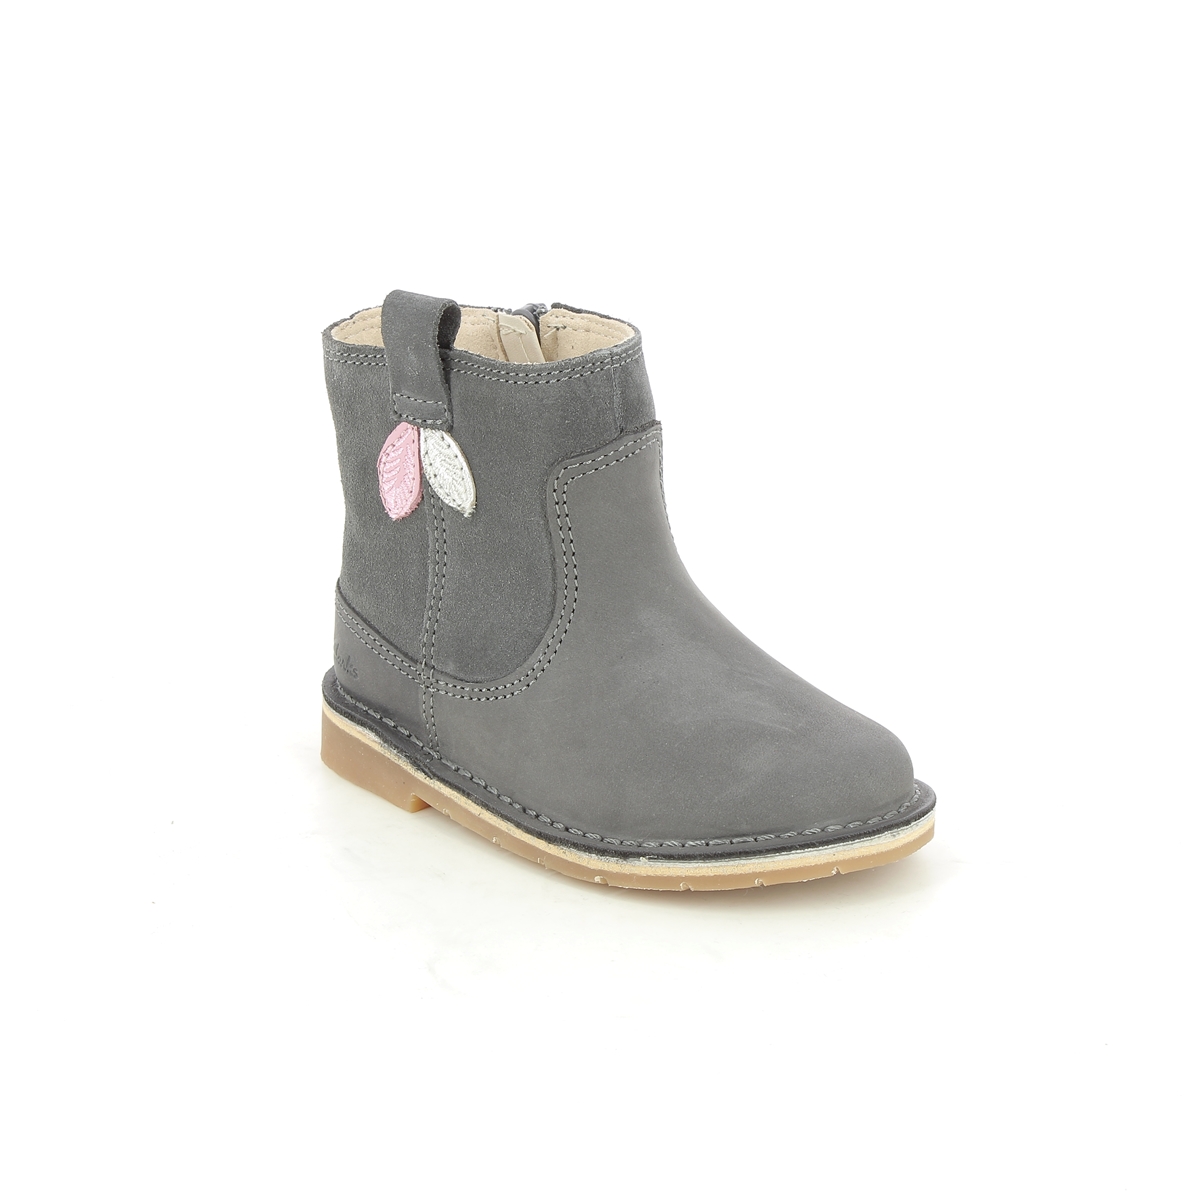 Clarks Comet Style T Grey leather Kids Toddler Girls Boots 6194-26F in a Plain Leather in Size 4.5